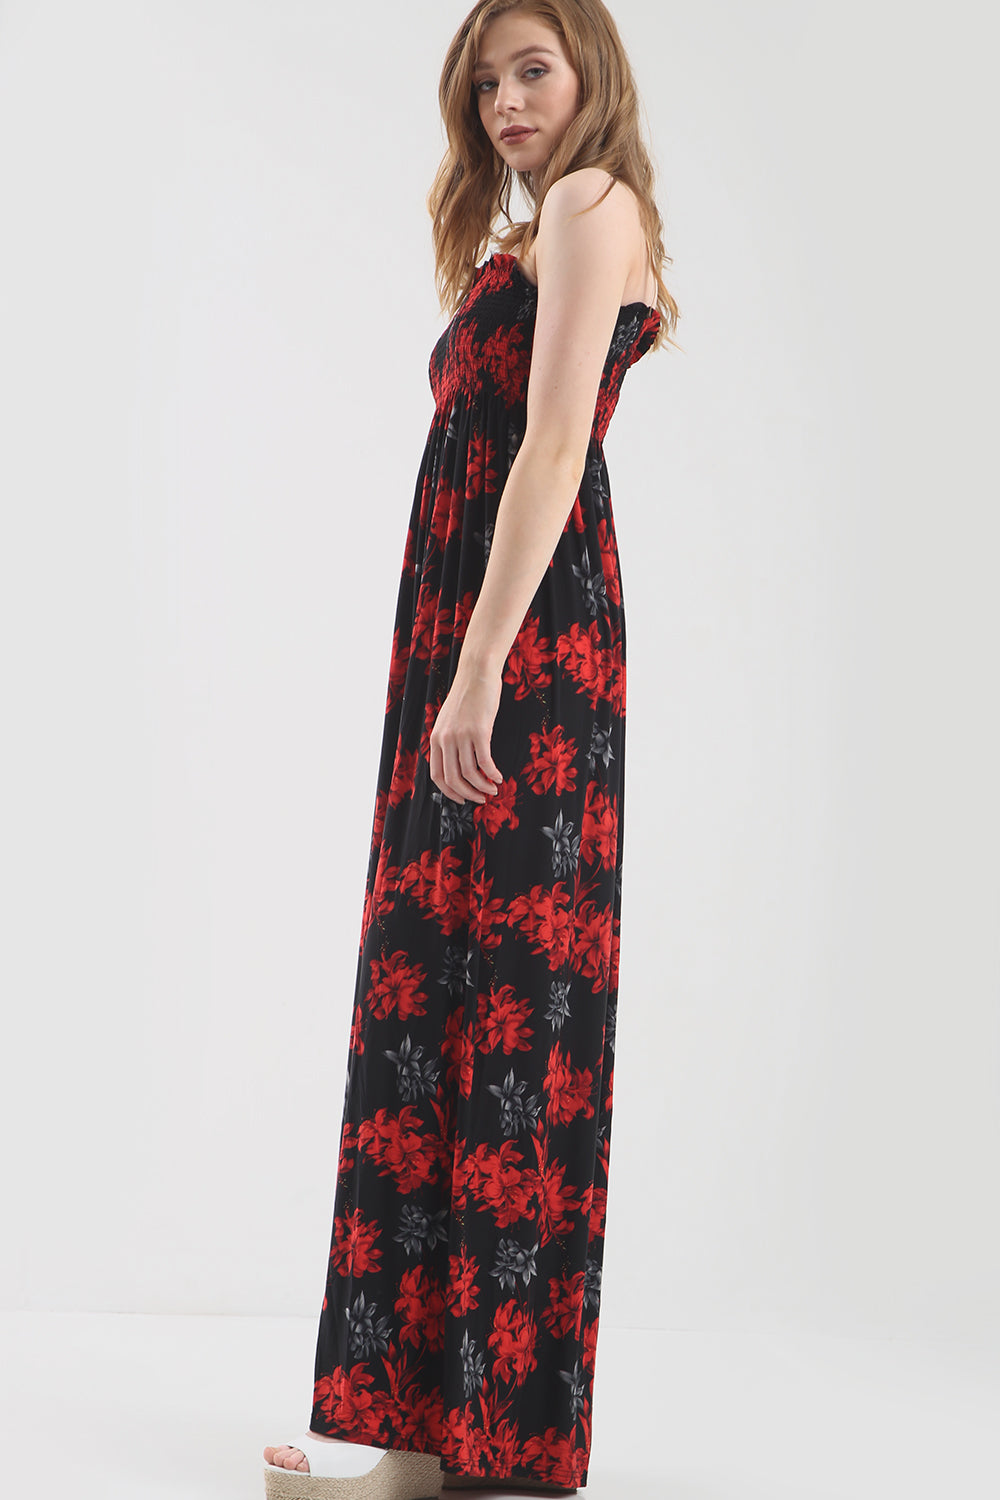 Strapless Maxi Dress in Red Tropical Print - bejealous-com